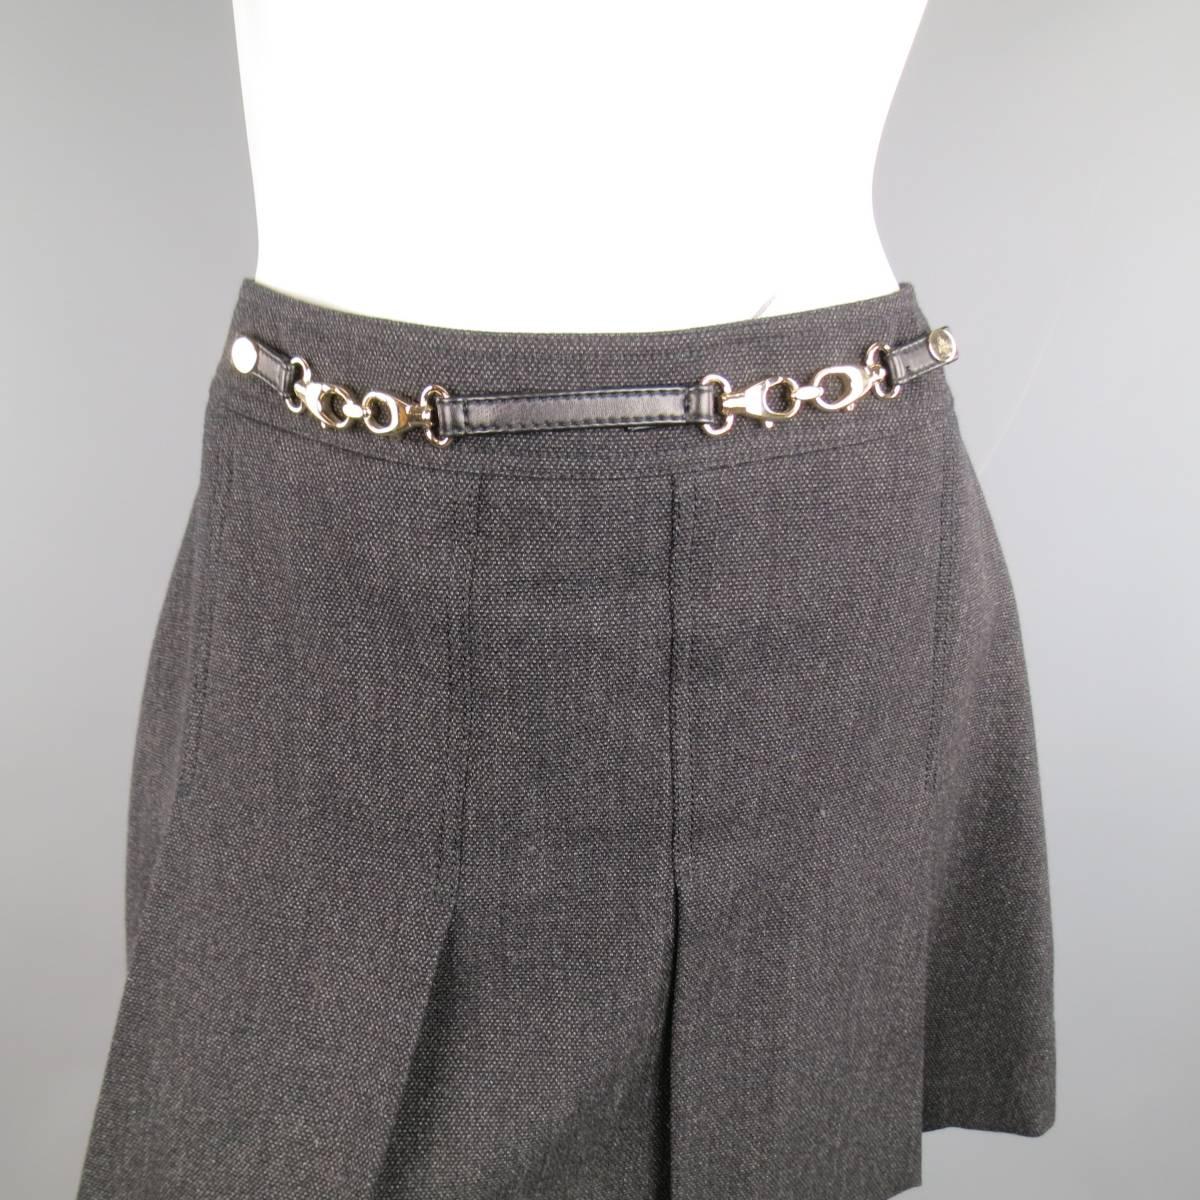 GUCCI mini skirt in a charcoal and black wool tweed featuring large box pleats and gold tone metal hardware belt detail with black leather strap. Made in Italy.
 
Excellent Pre-Owned Condition.
Marked: IT 44
 
Measurements:
 
Waste: 31 in.
Hips: 40